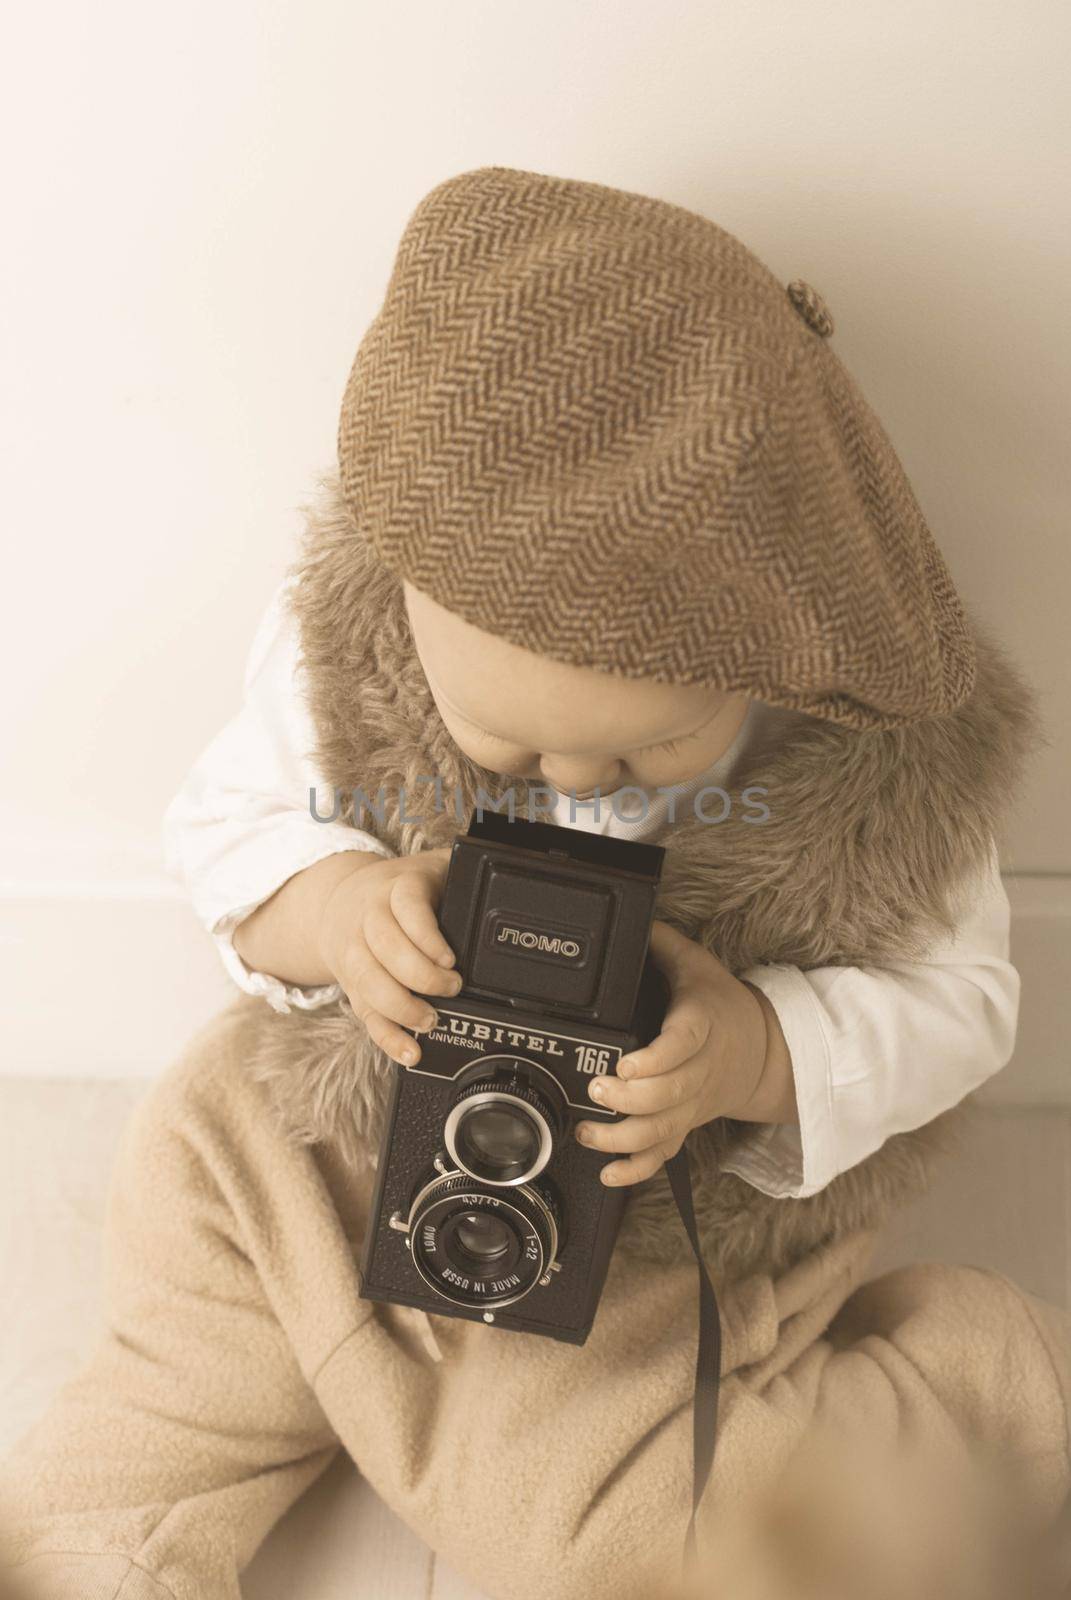 Retro styled photo with cute baby and old camera